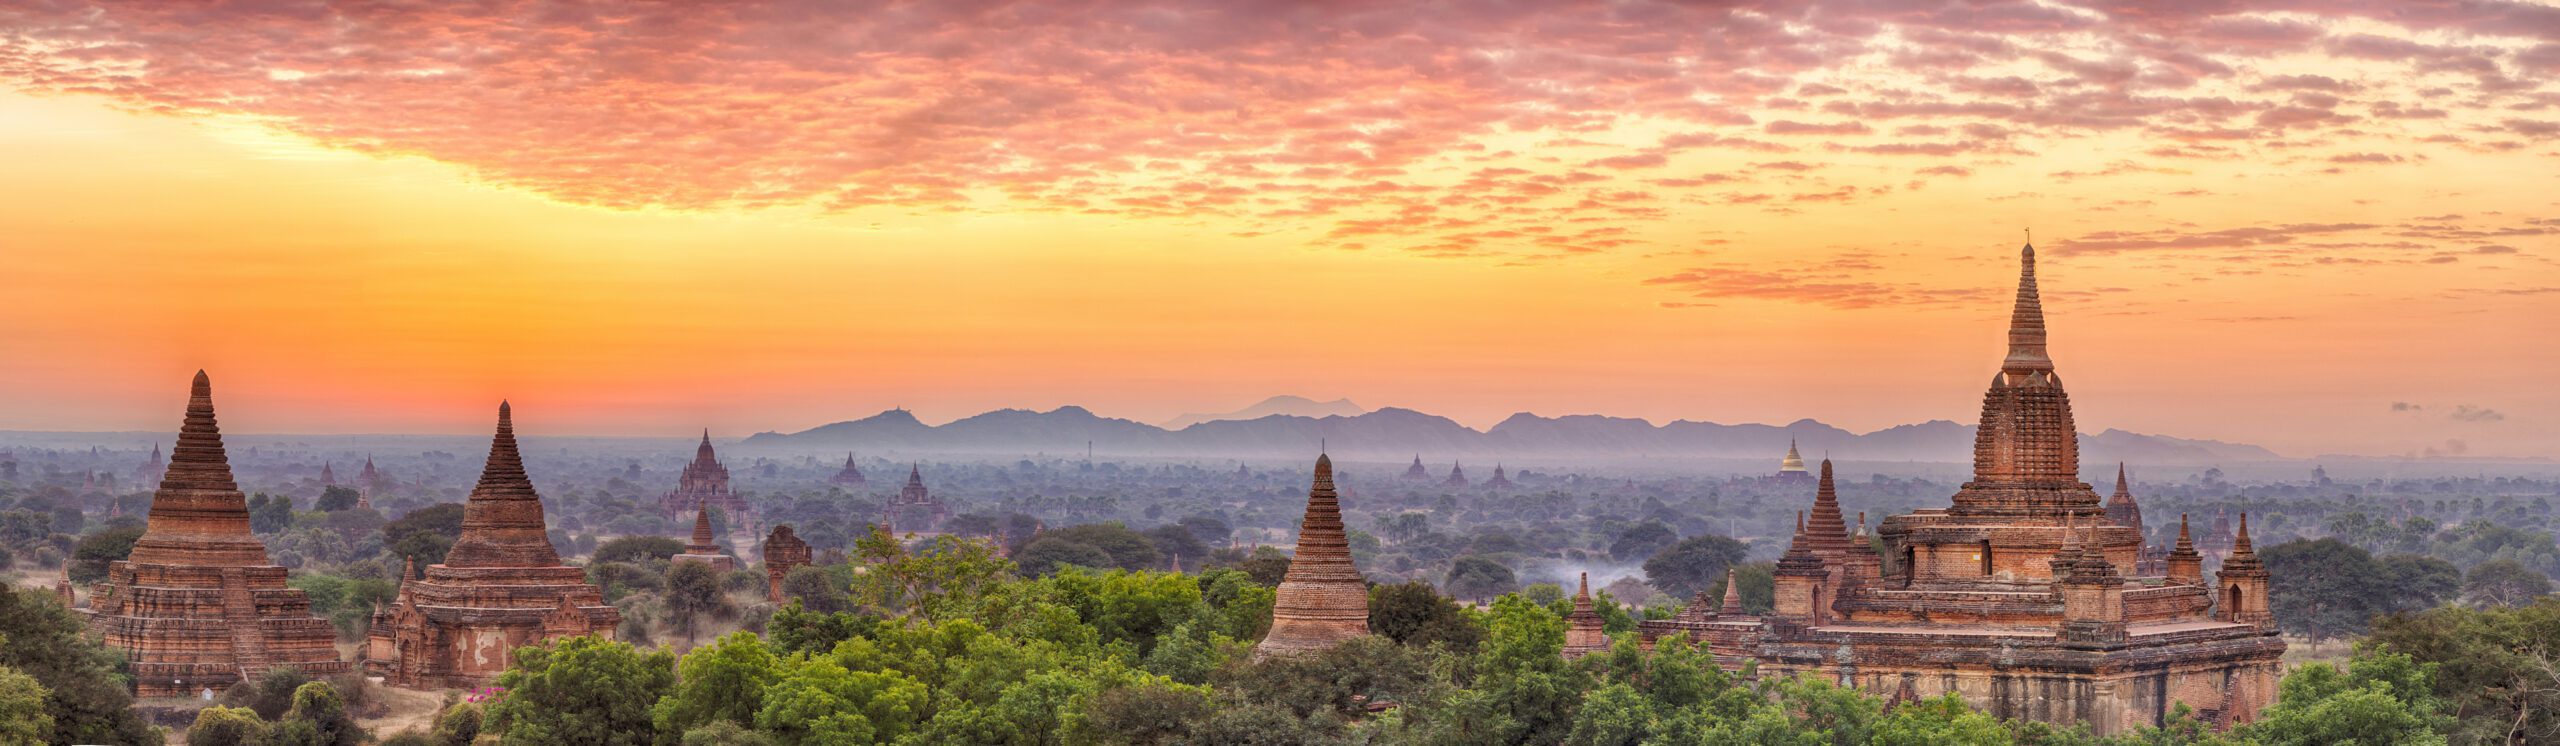 Beautiful sunrise over old pagodas of an ancient city of Bagan, Myanmar. Panoramic hdr photo